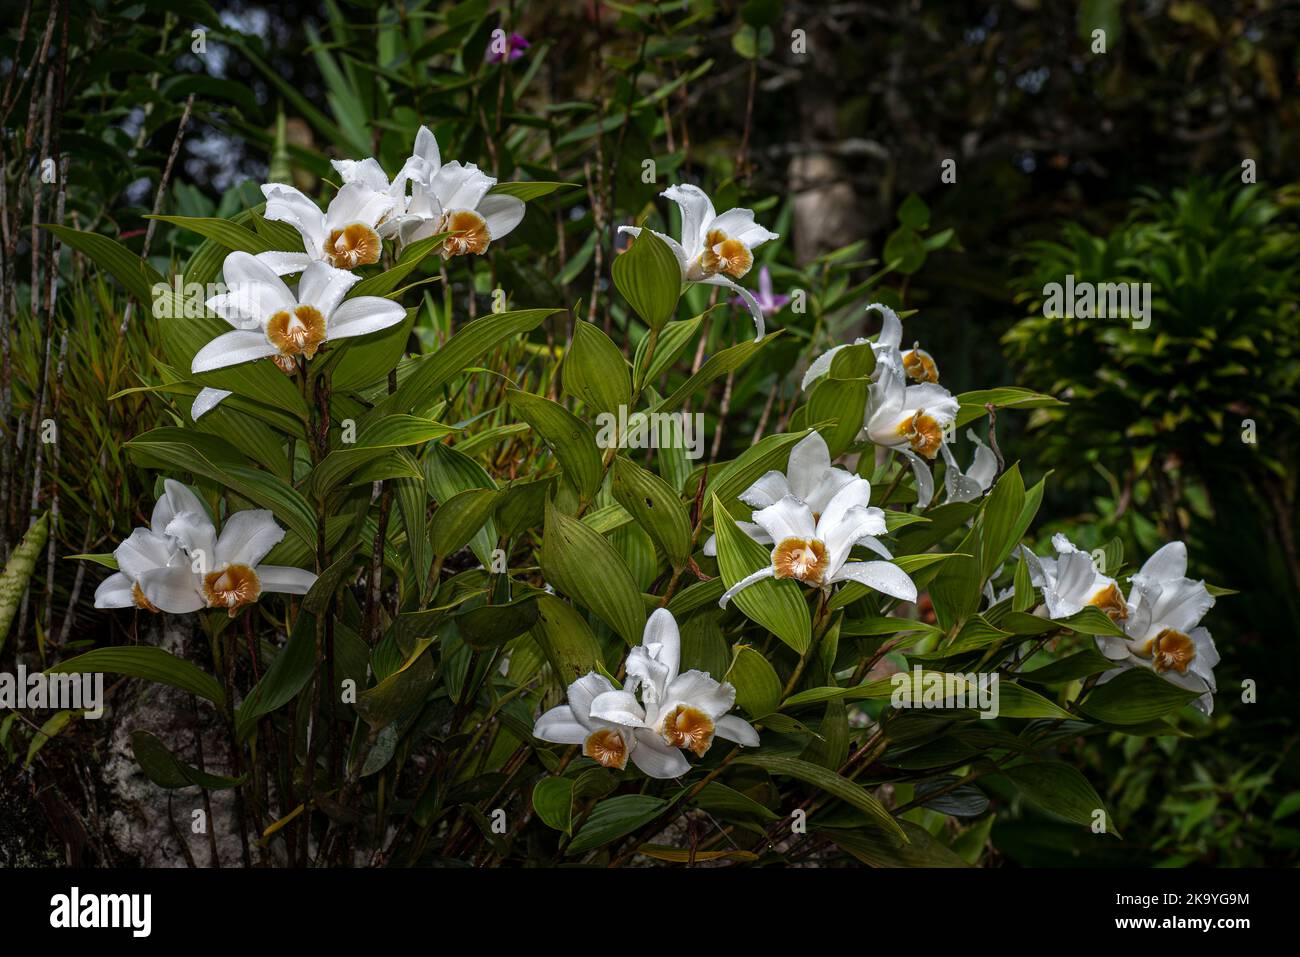 Many white sobralia orchids with flowerrs in full bloom images taken in Panamas cloud forest Stock Photo